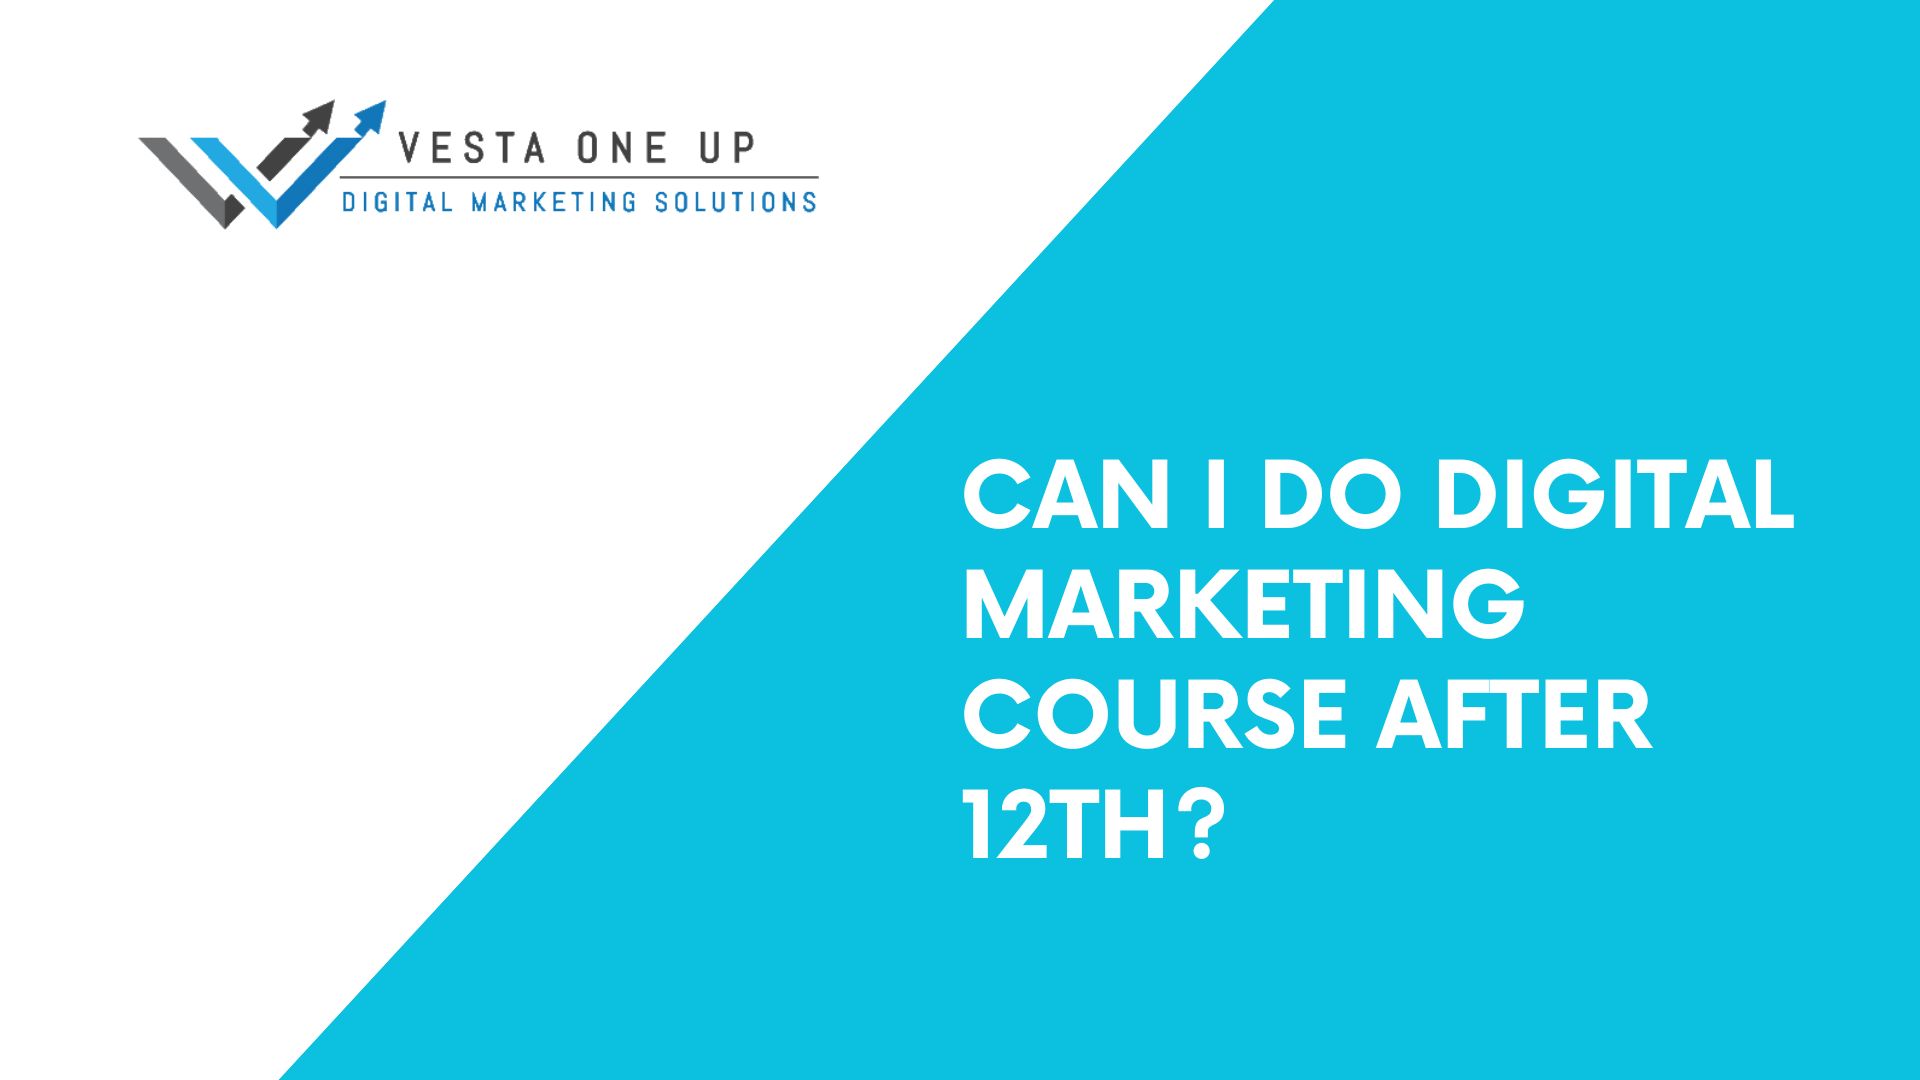 Can i do digital marketing course after 12th?